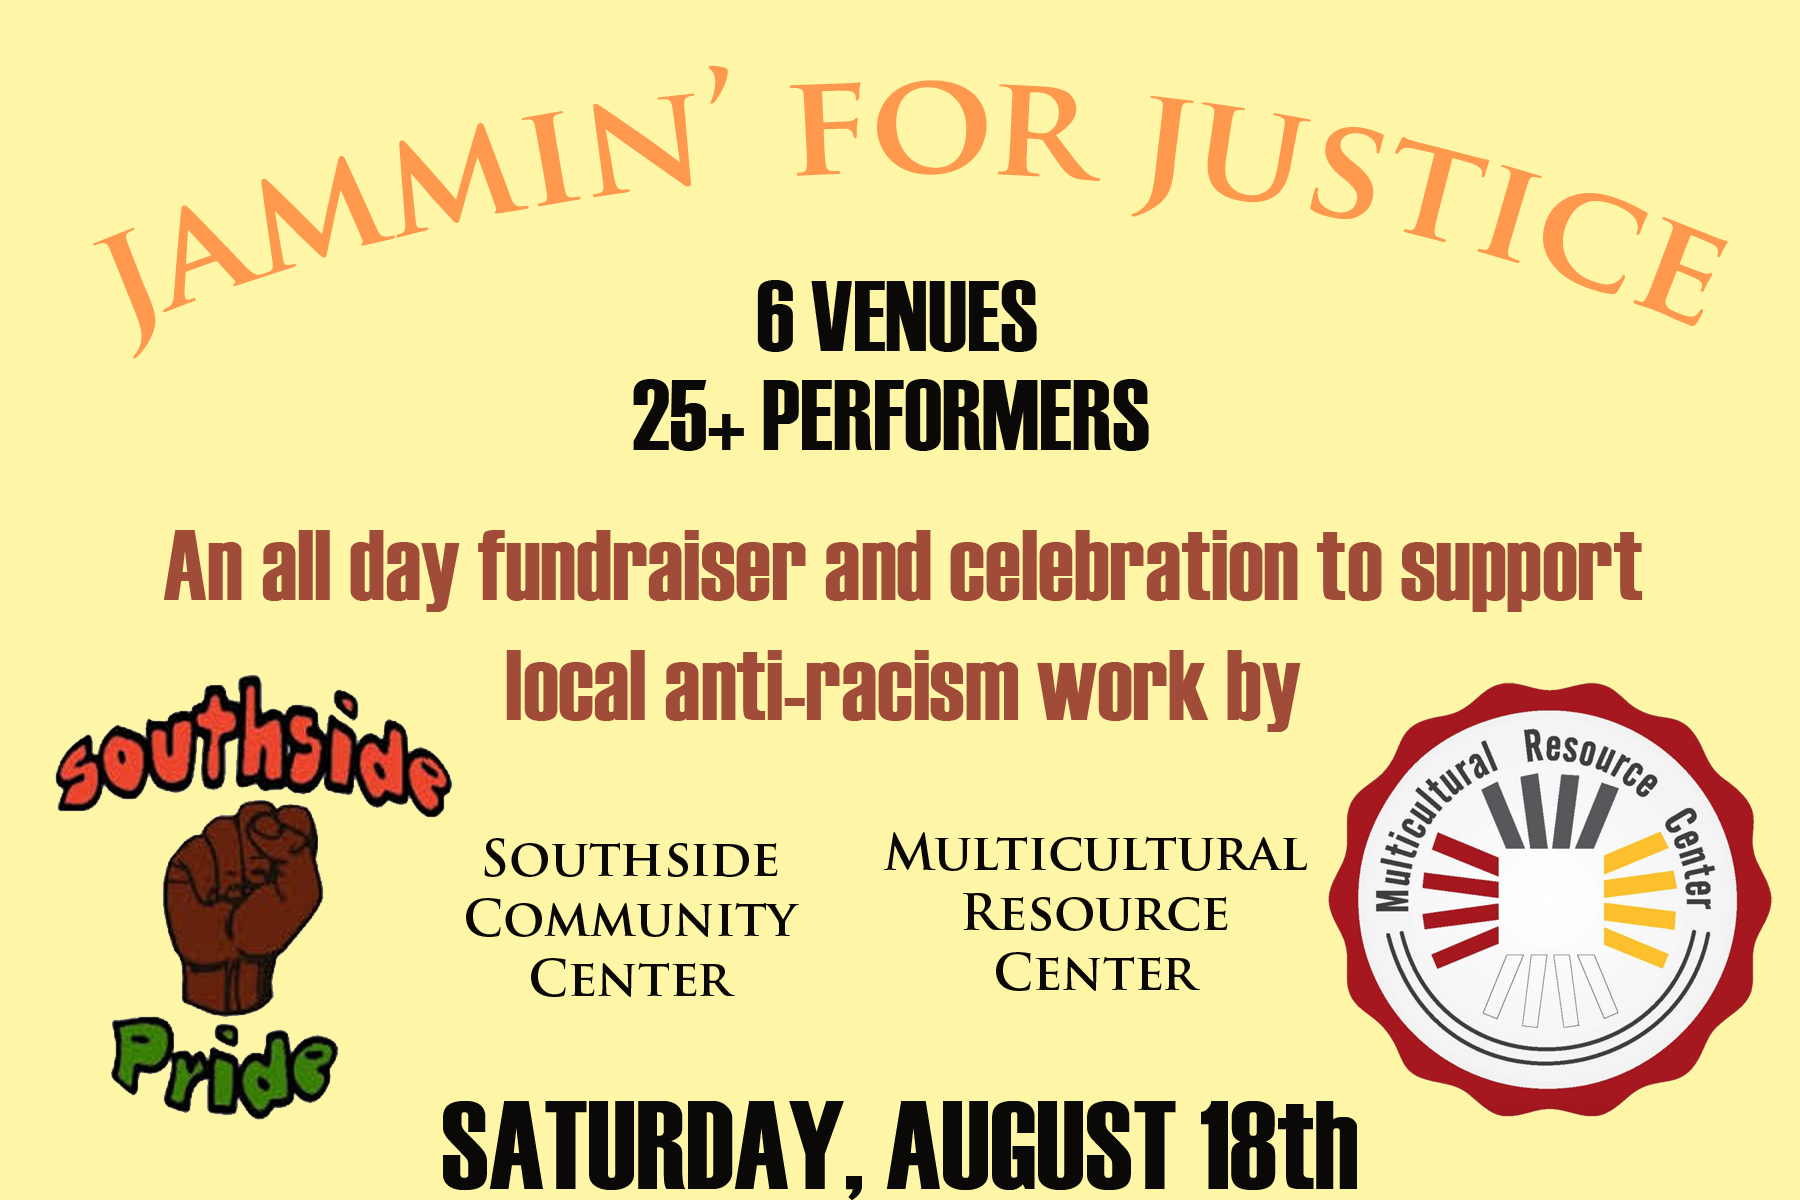 jammin jamming for justice southside community center mrc multicultural resource fundraiser event charity fundraising racism black african american reggae kevin kinsella jbb ithaca downtown the range west end westy commons chanticleer kava concert